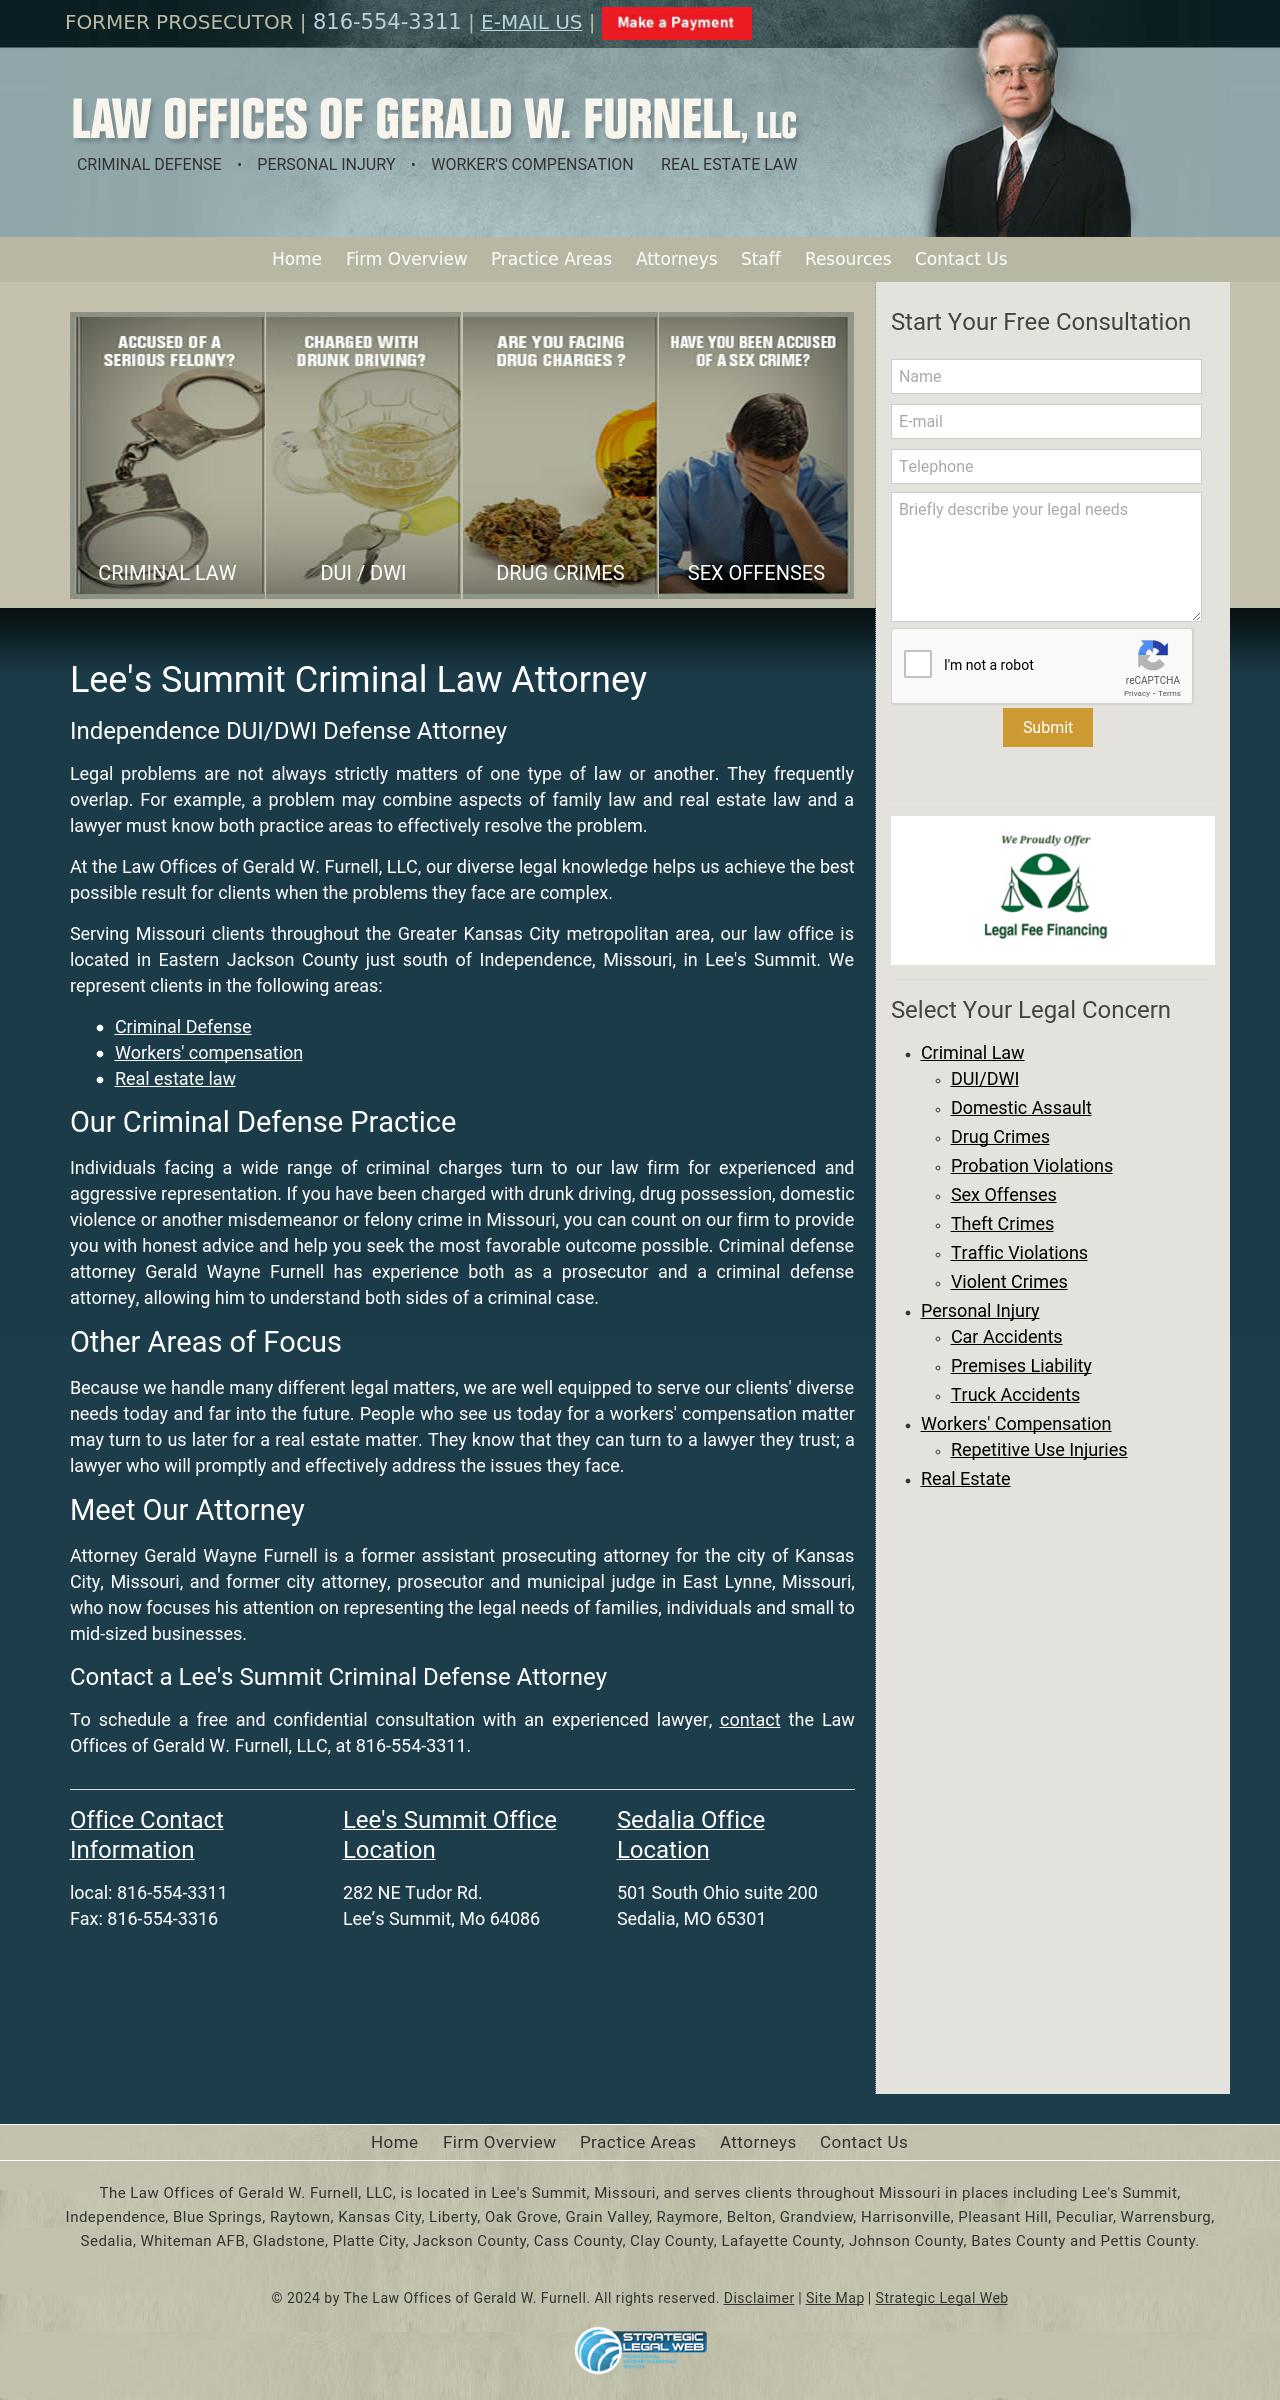 Law Offices of Gerald W. Furnell, LLC - Lee's Summit MO Lawyers